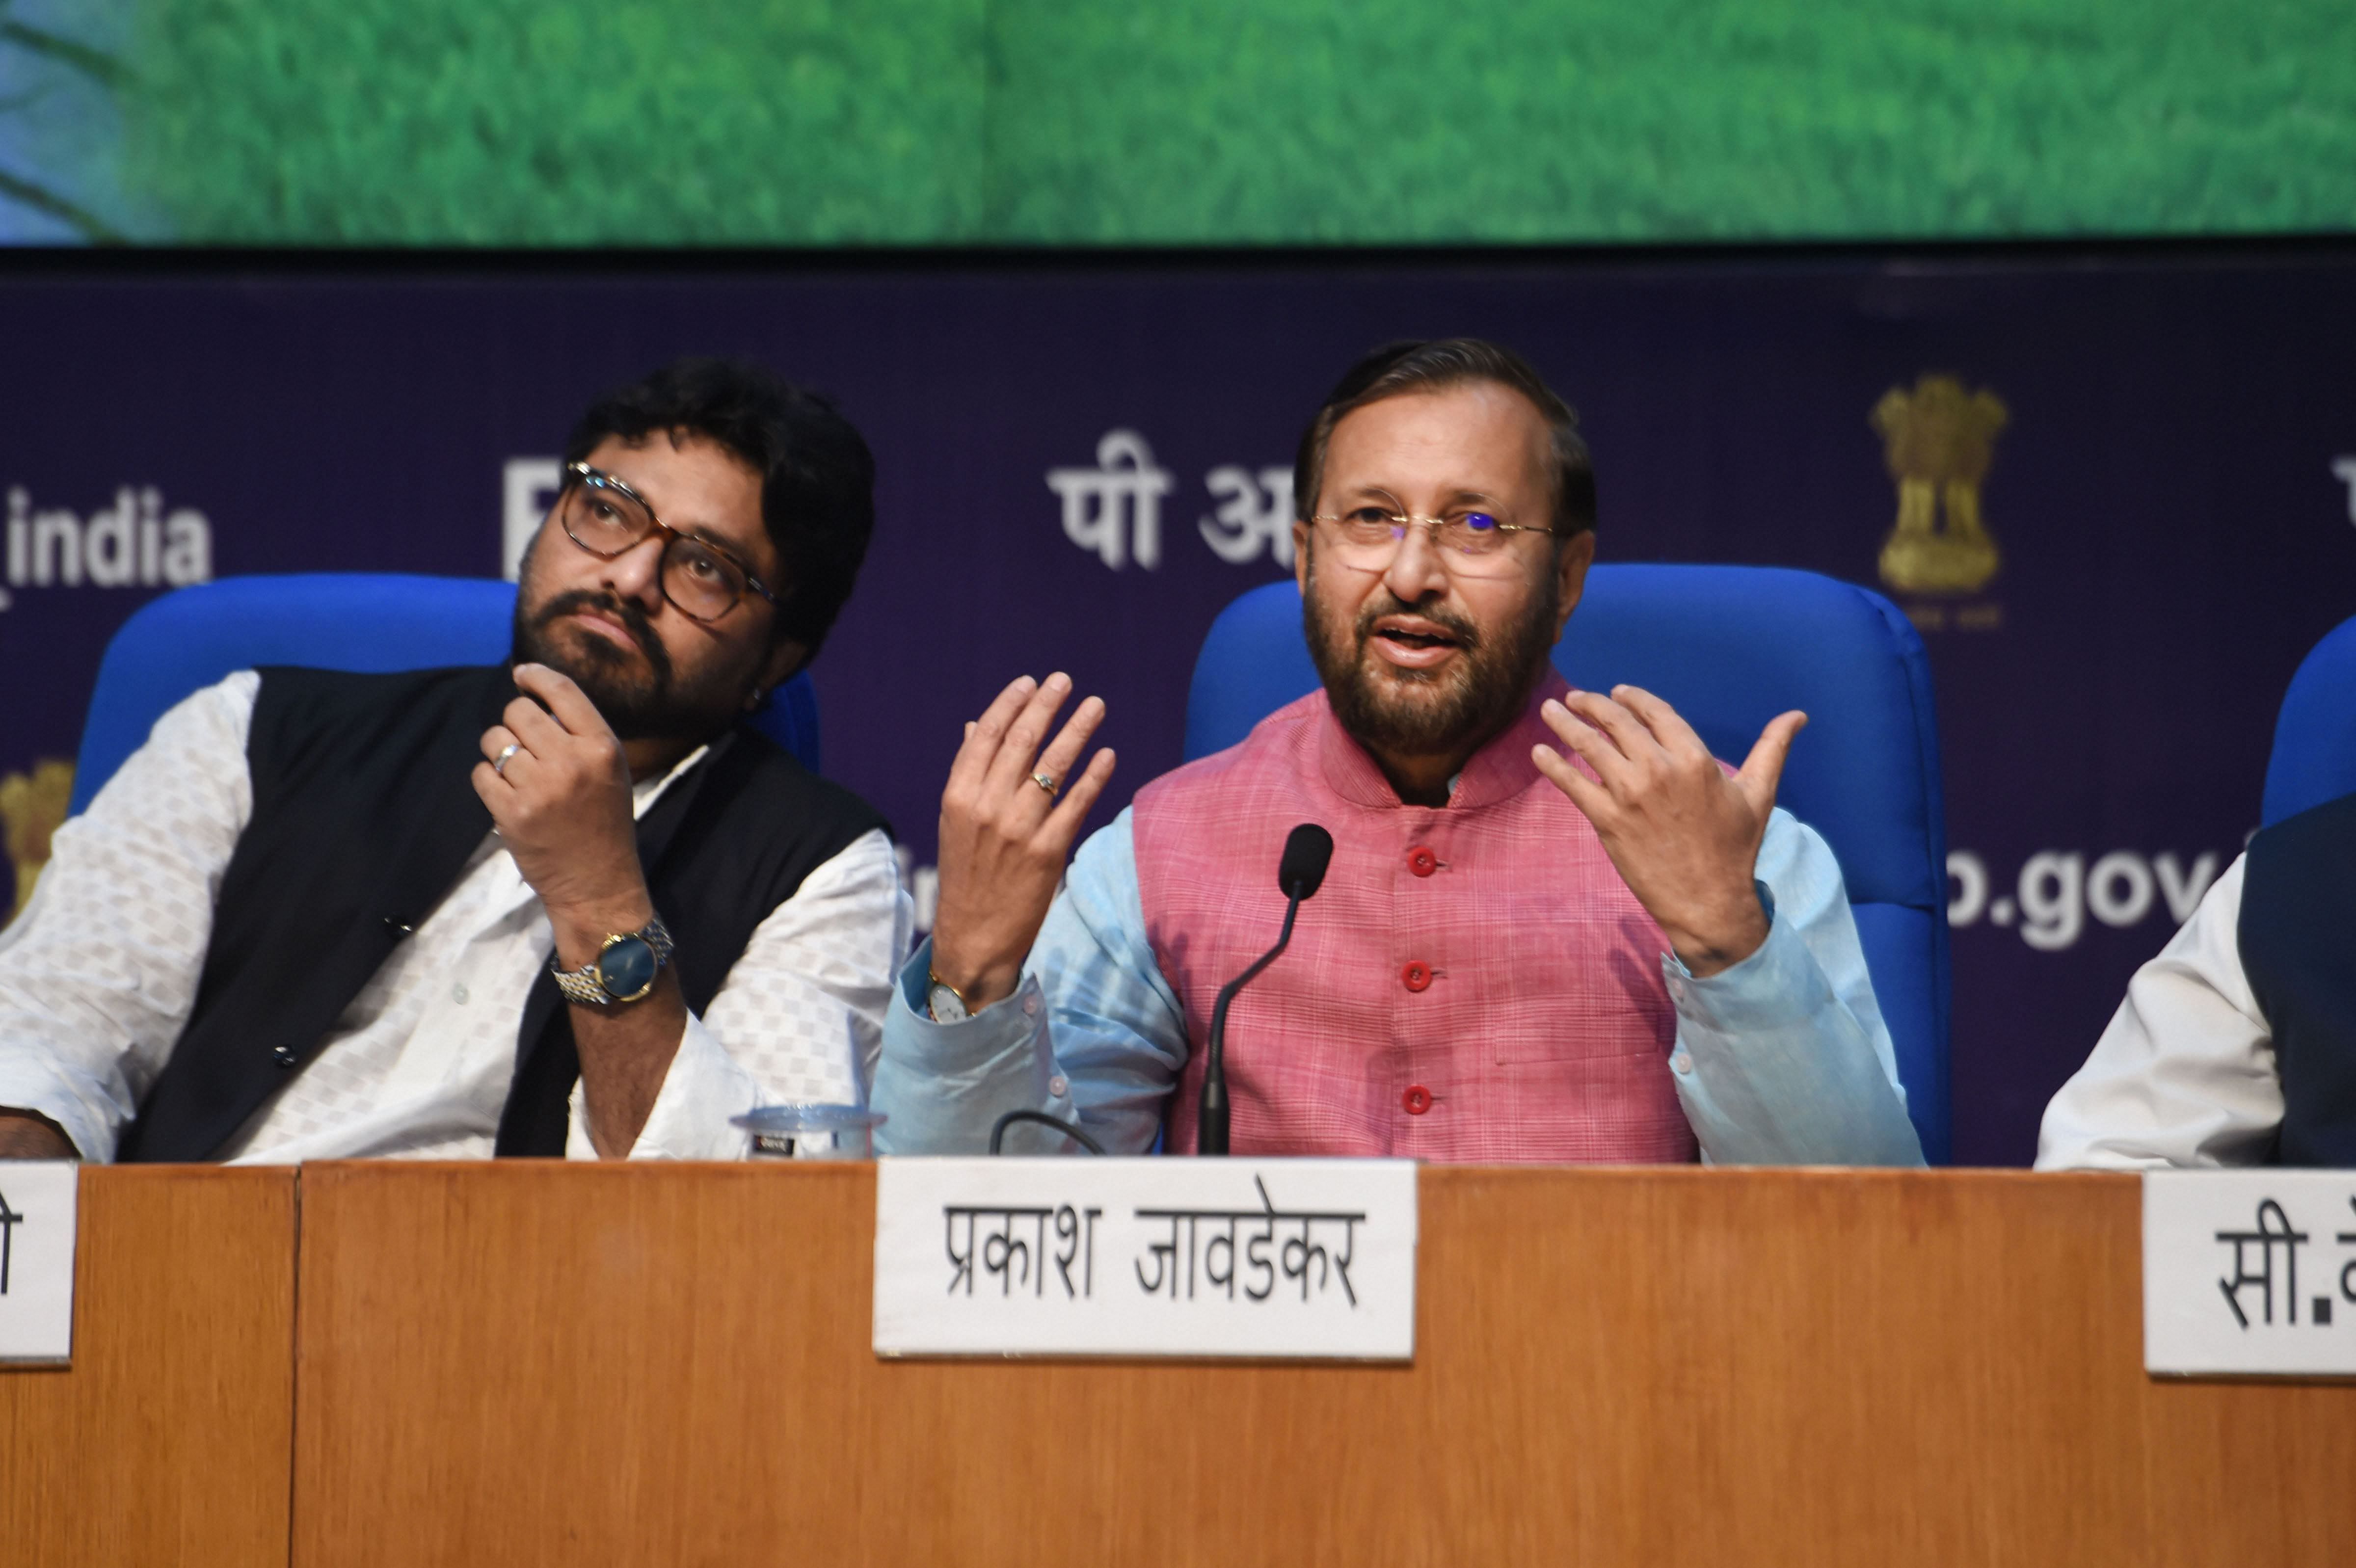 The Environment Ministry has set 2030 as the target year to finish the task that has the potential to create 75 lakh new jobs as every hectare could provide livelihood options to 1.5 persons, said Union Environment Minister Prakash Javadekar. Photo/PTI